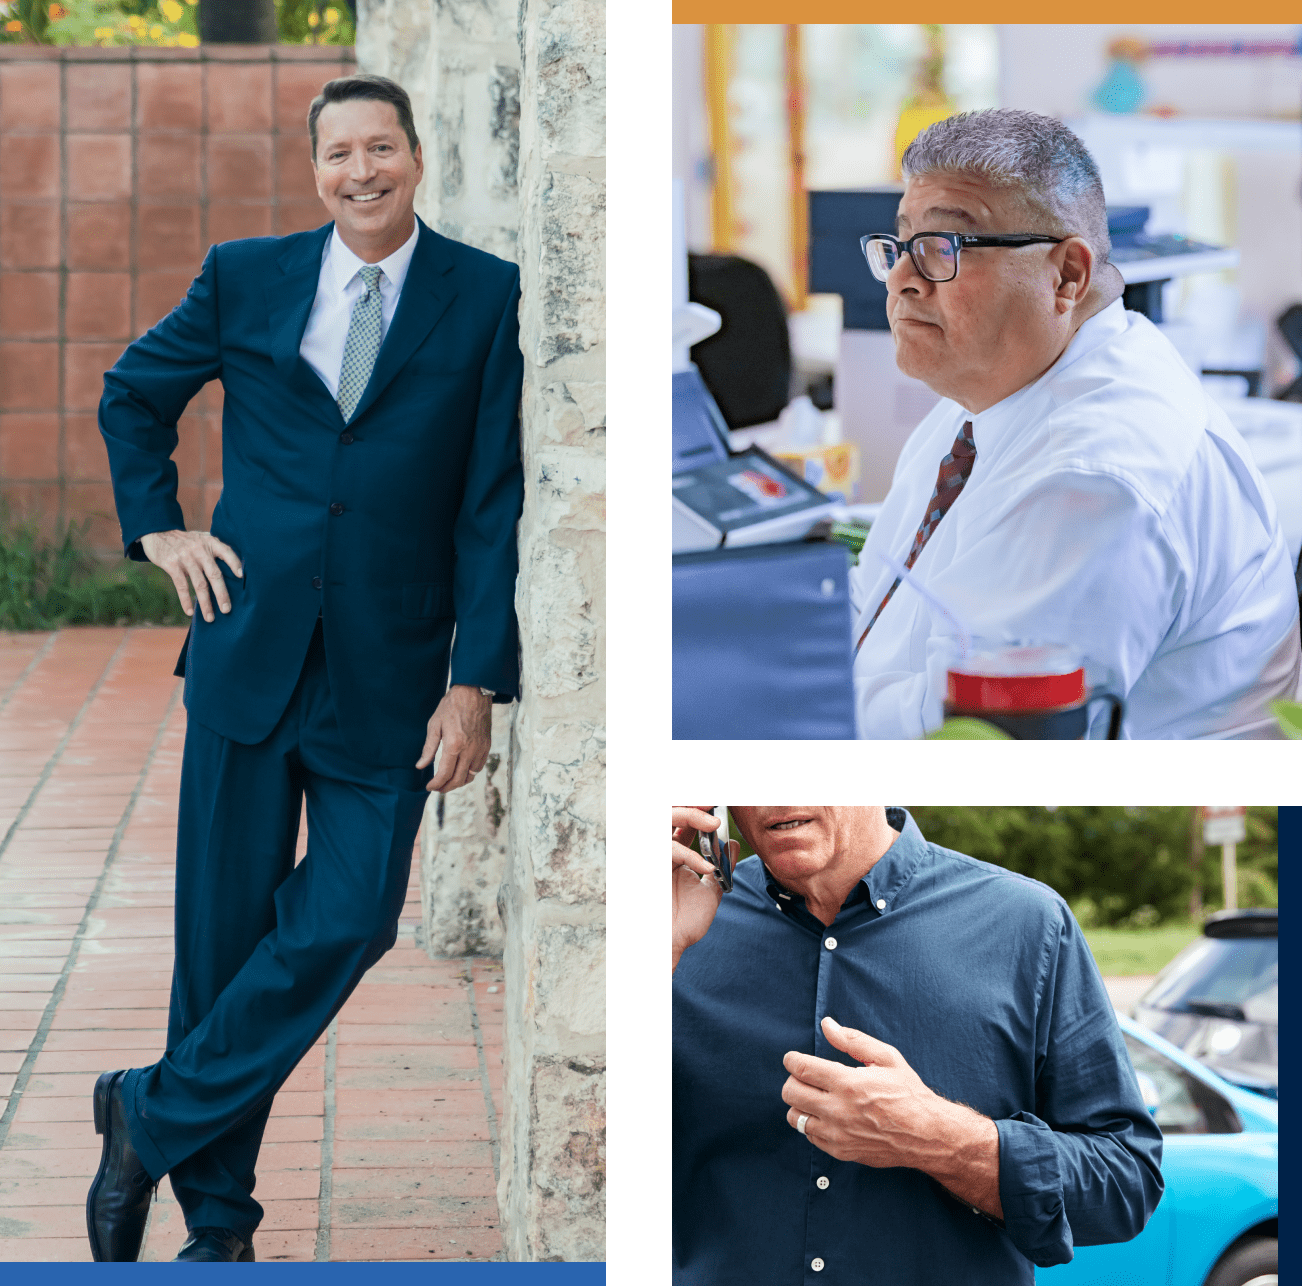 Collage: smiling businessman, focused office worker, man on phone outdoors.